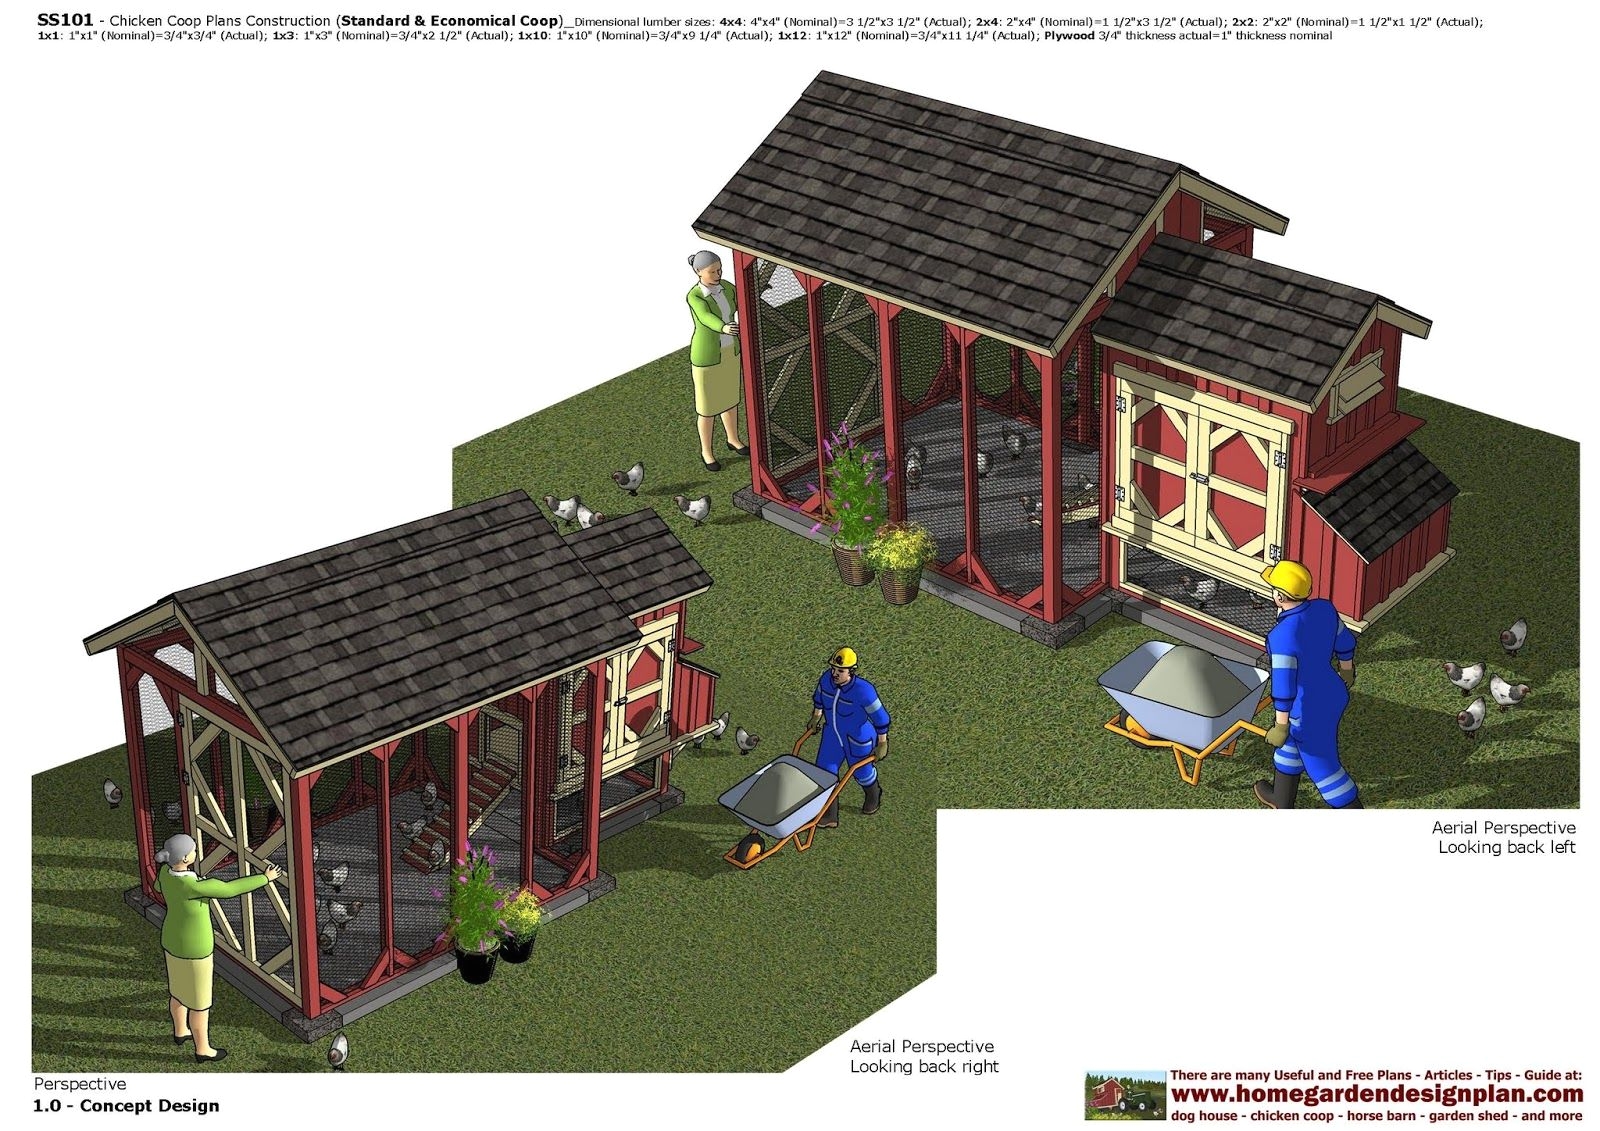 home garden plans ss101 chicken coop plans construction chicken has actual plans can hold 10 chickens